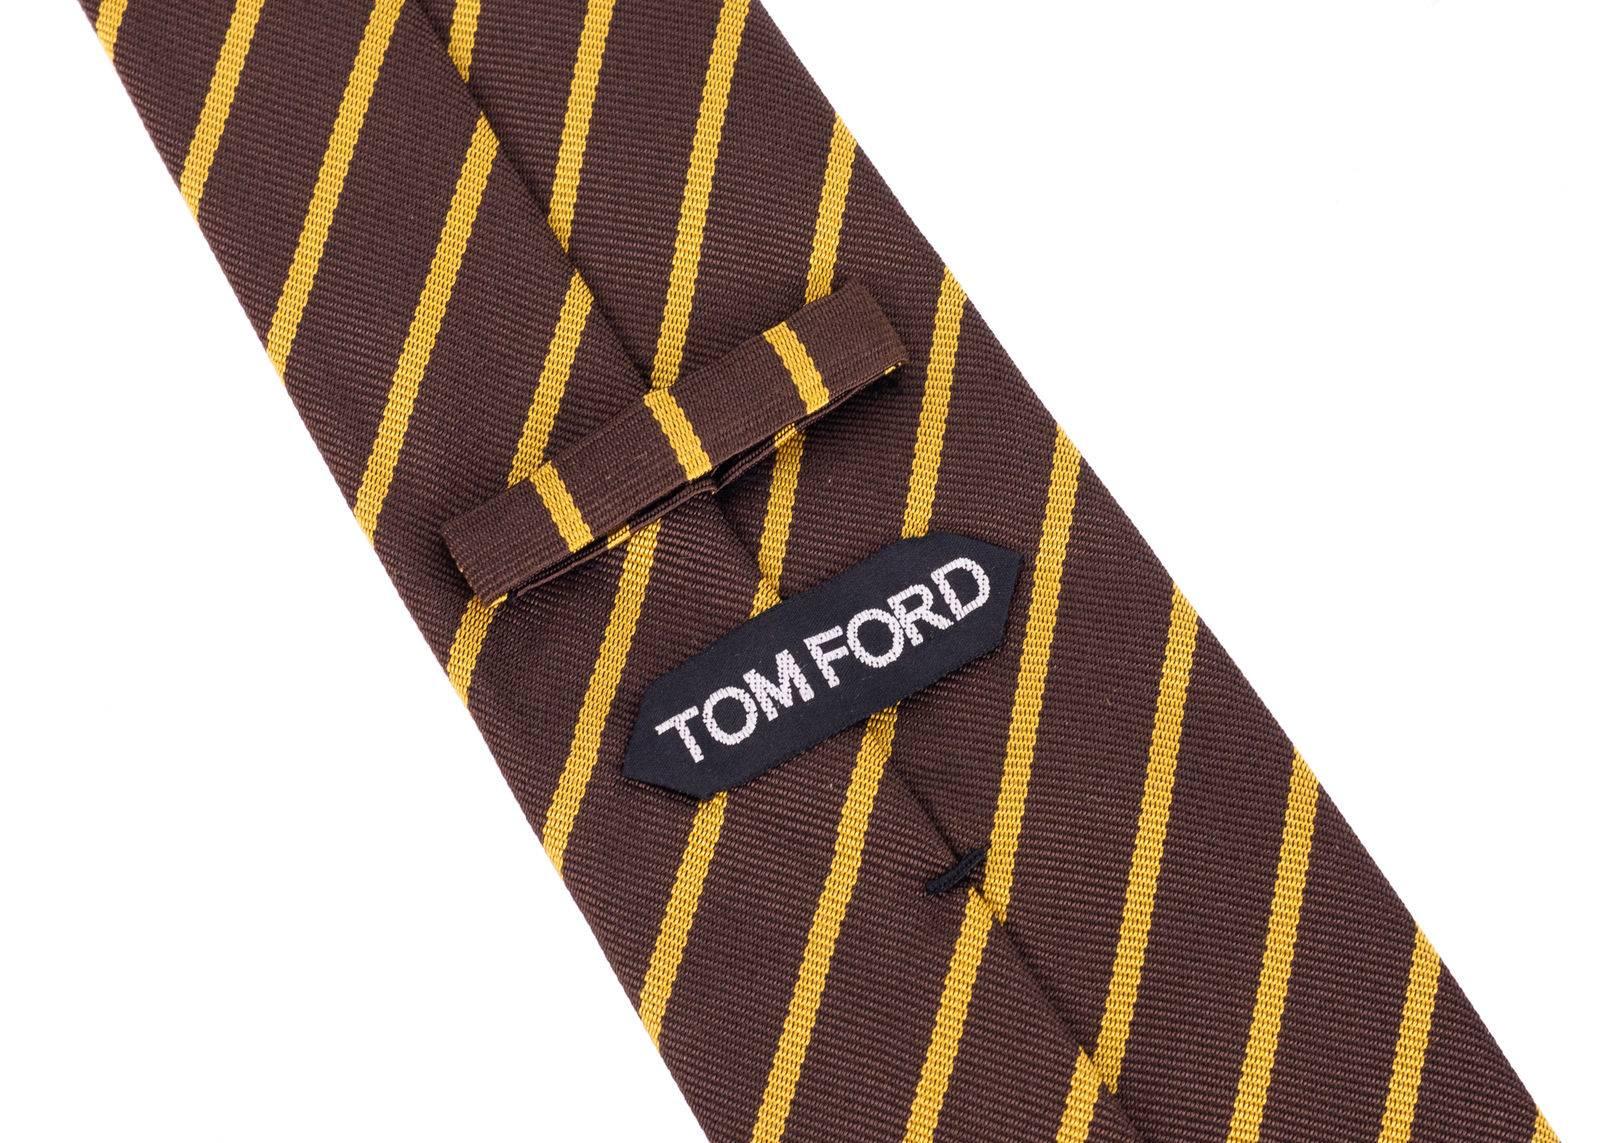 Italian luxury brand, Tom Ford, has crafted these gorgeous Silk Tie for important special occasions and professional events. The tie is great to pair with your favorite solid color button down and blazers with your chosen pair or classic trousers.